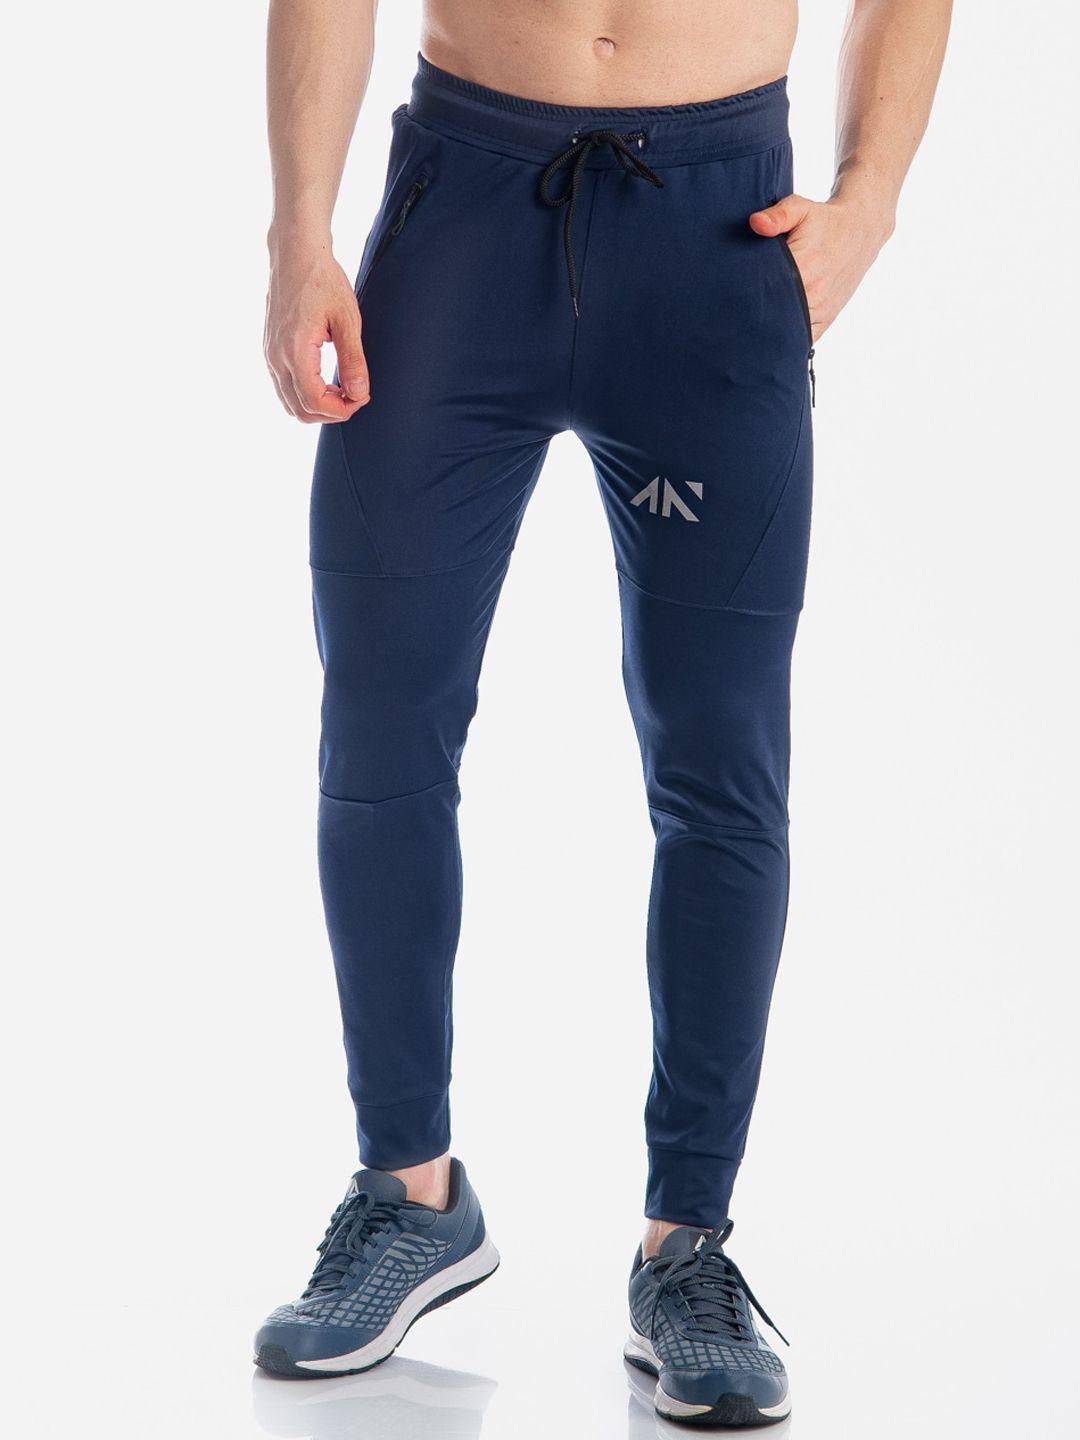 aesthetic nation men navy blue solid slim-fit joggers